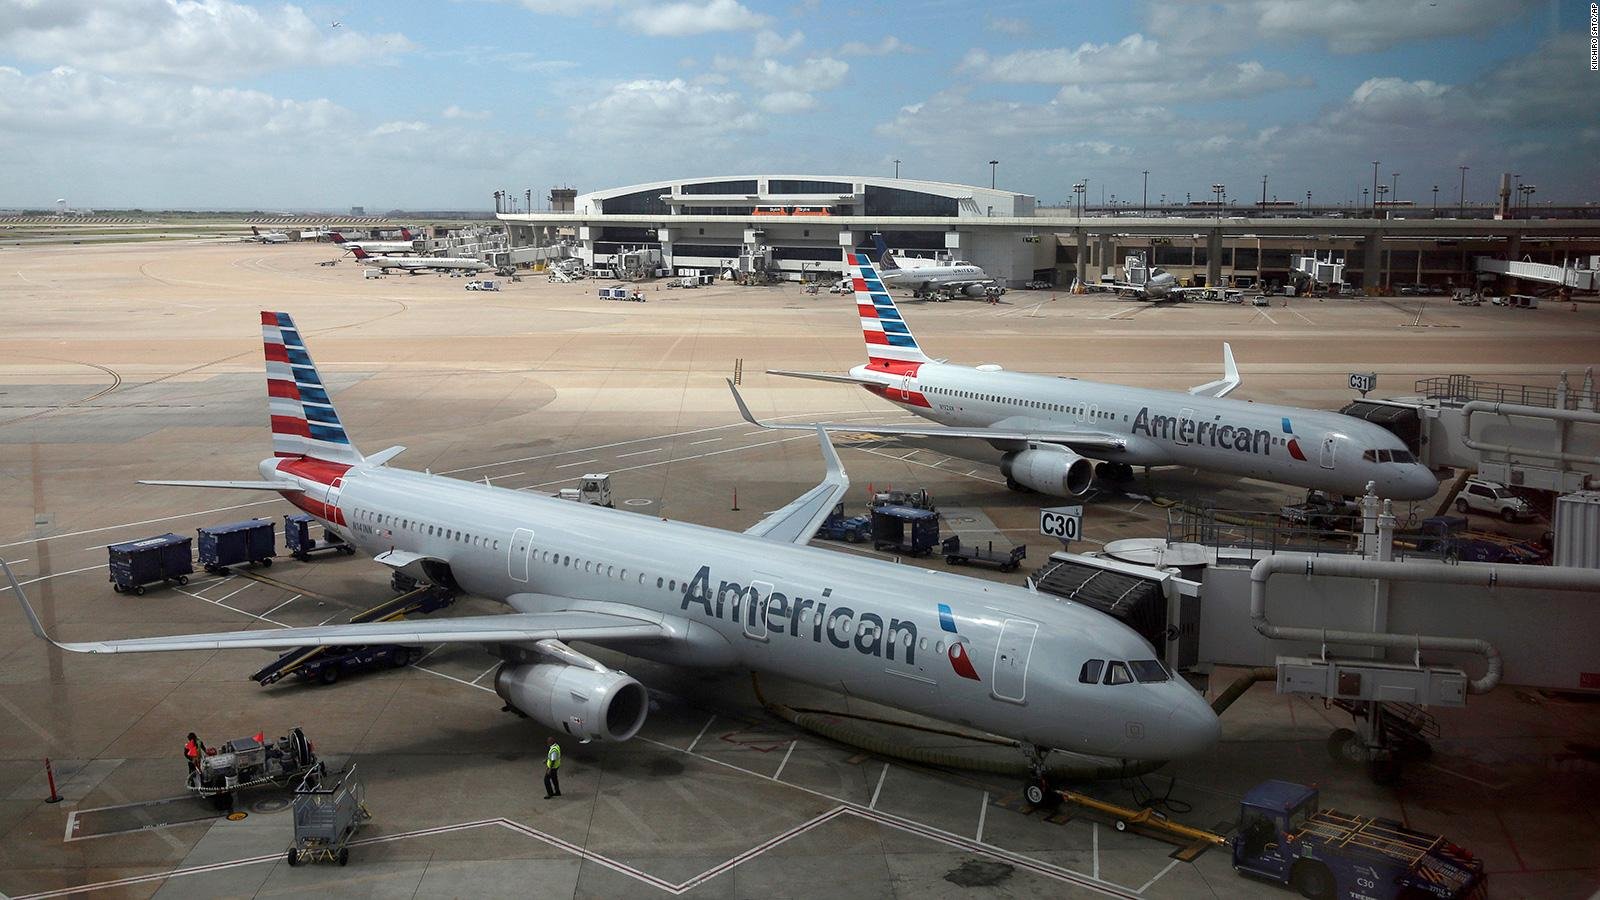 Ground stop at Dallas-Fort Worth airport lifted, FAA says